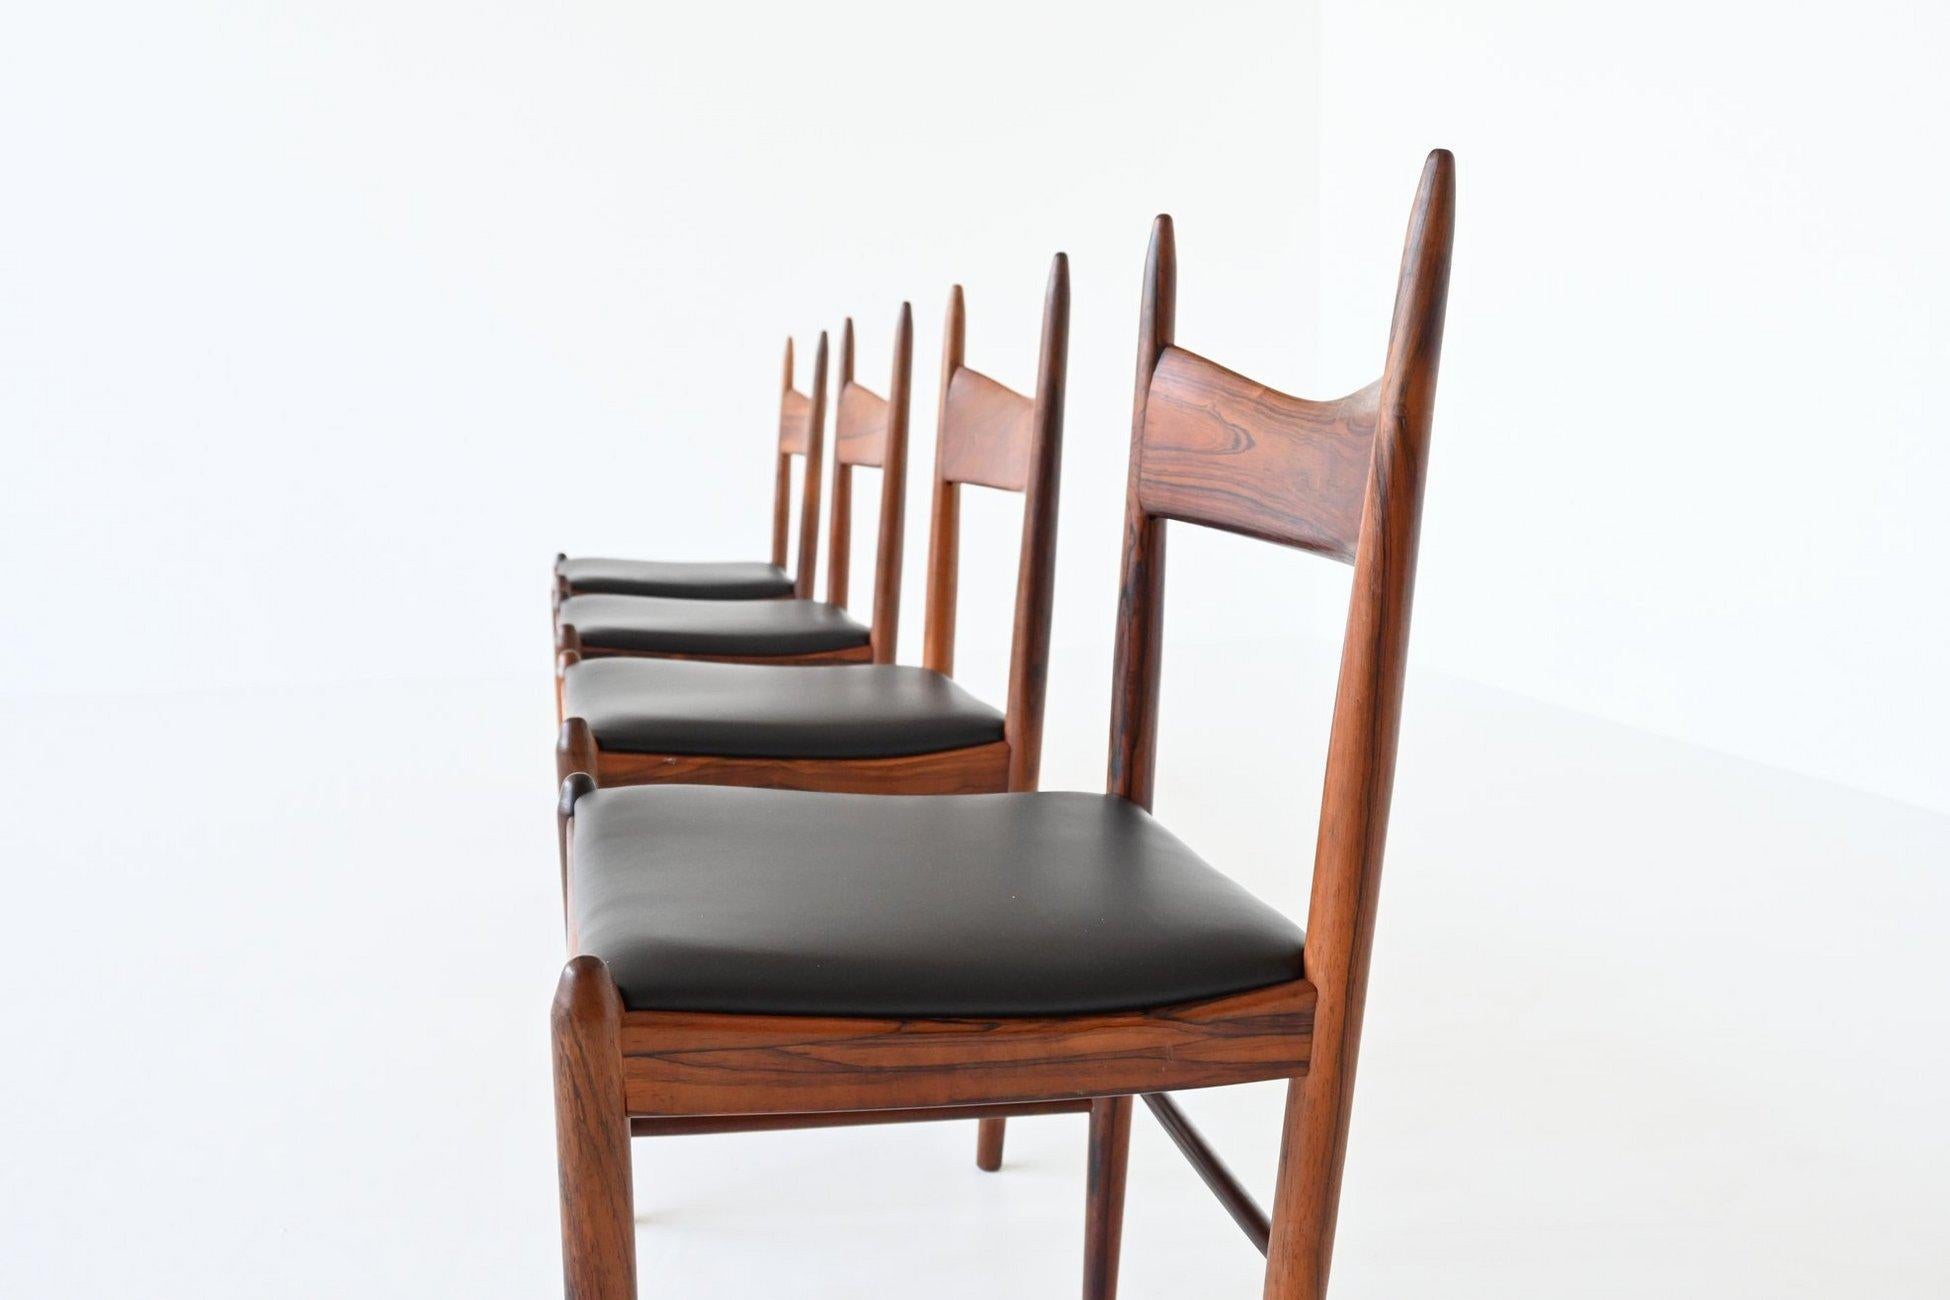 Stunning set of four dining chairs designed by H. Vestervig Eriksen for Brdr. Tromborg, Denmark 1960. These amazingly shaped chairs are made of beautiful grained solid Brazilian rosewood and the seats are upholstered with high quality black aniline